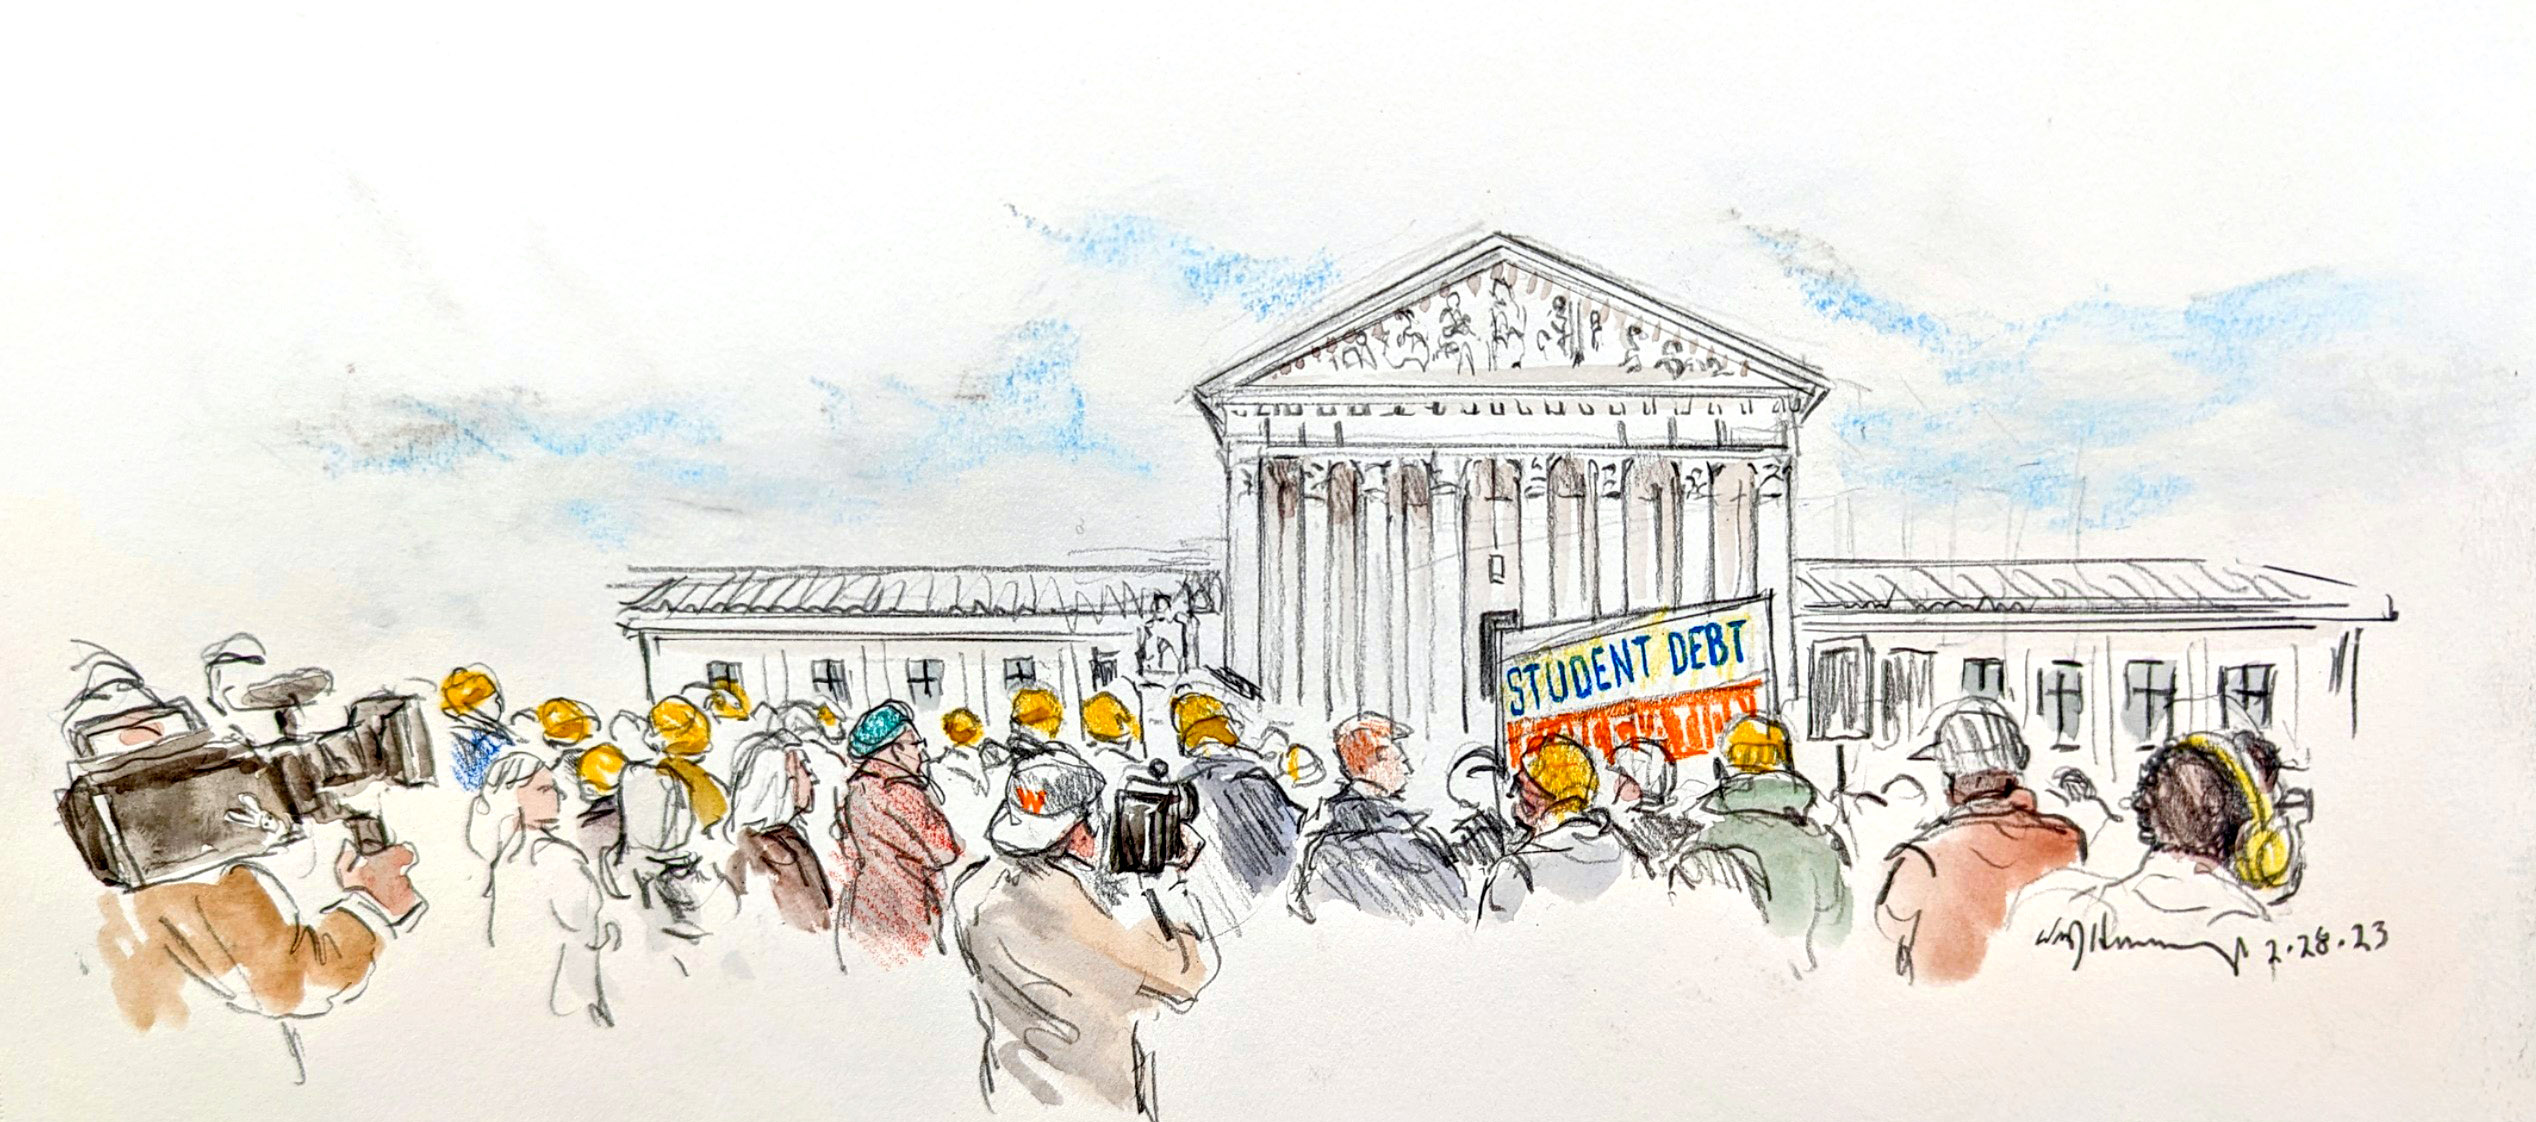 Artist’s sketch of protesters and camera operators outside the Supreme Court. A sign reads "Student Debt."